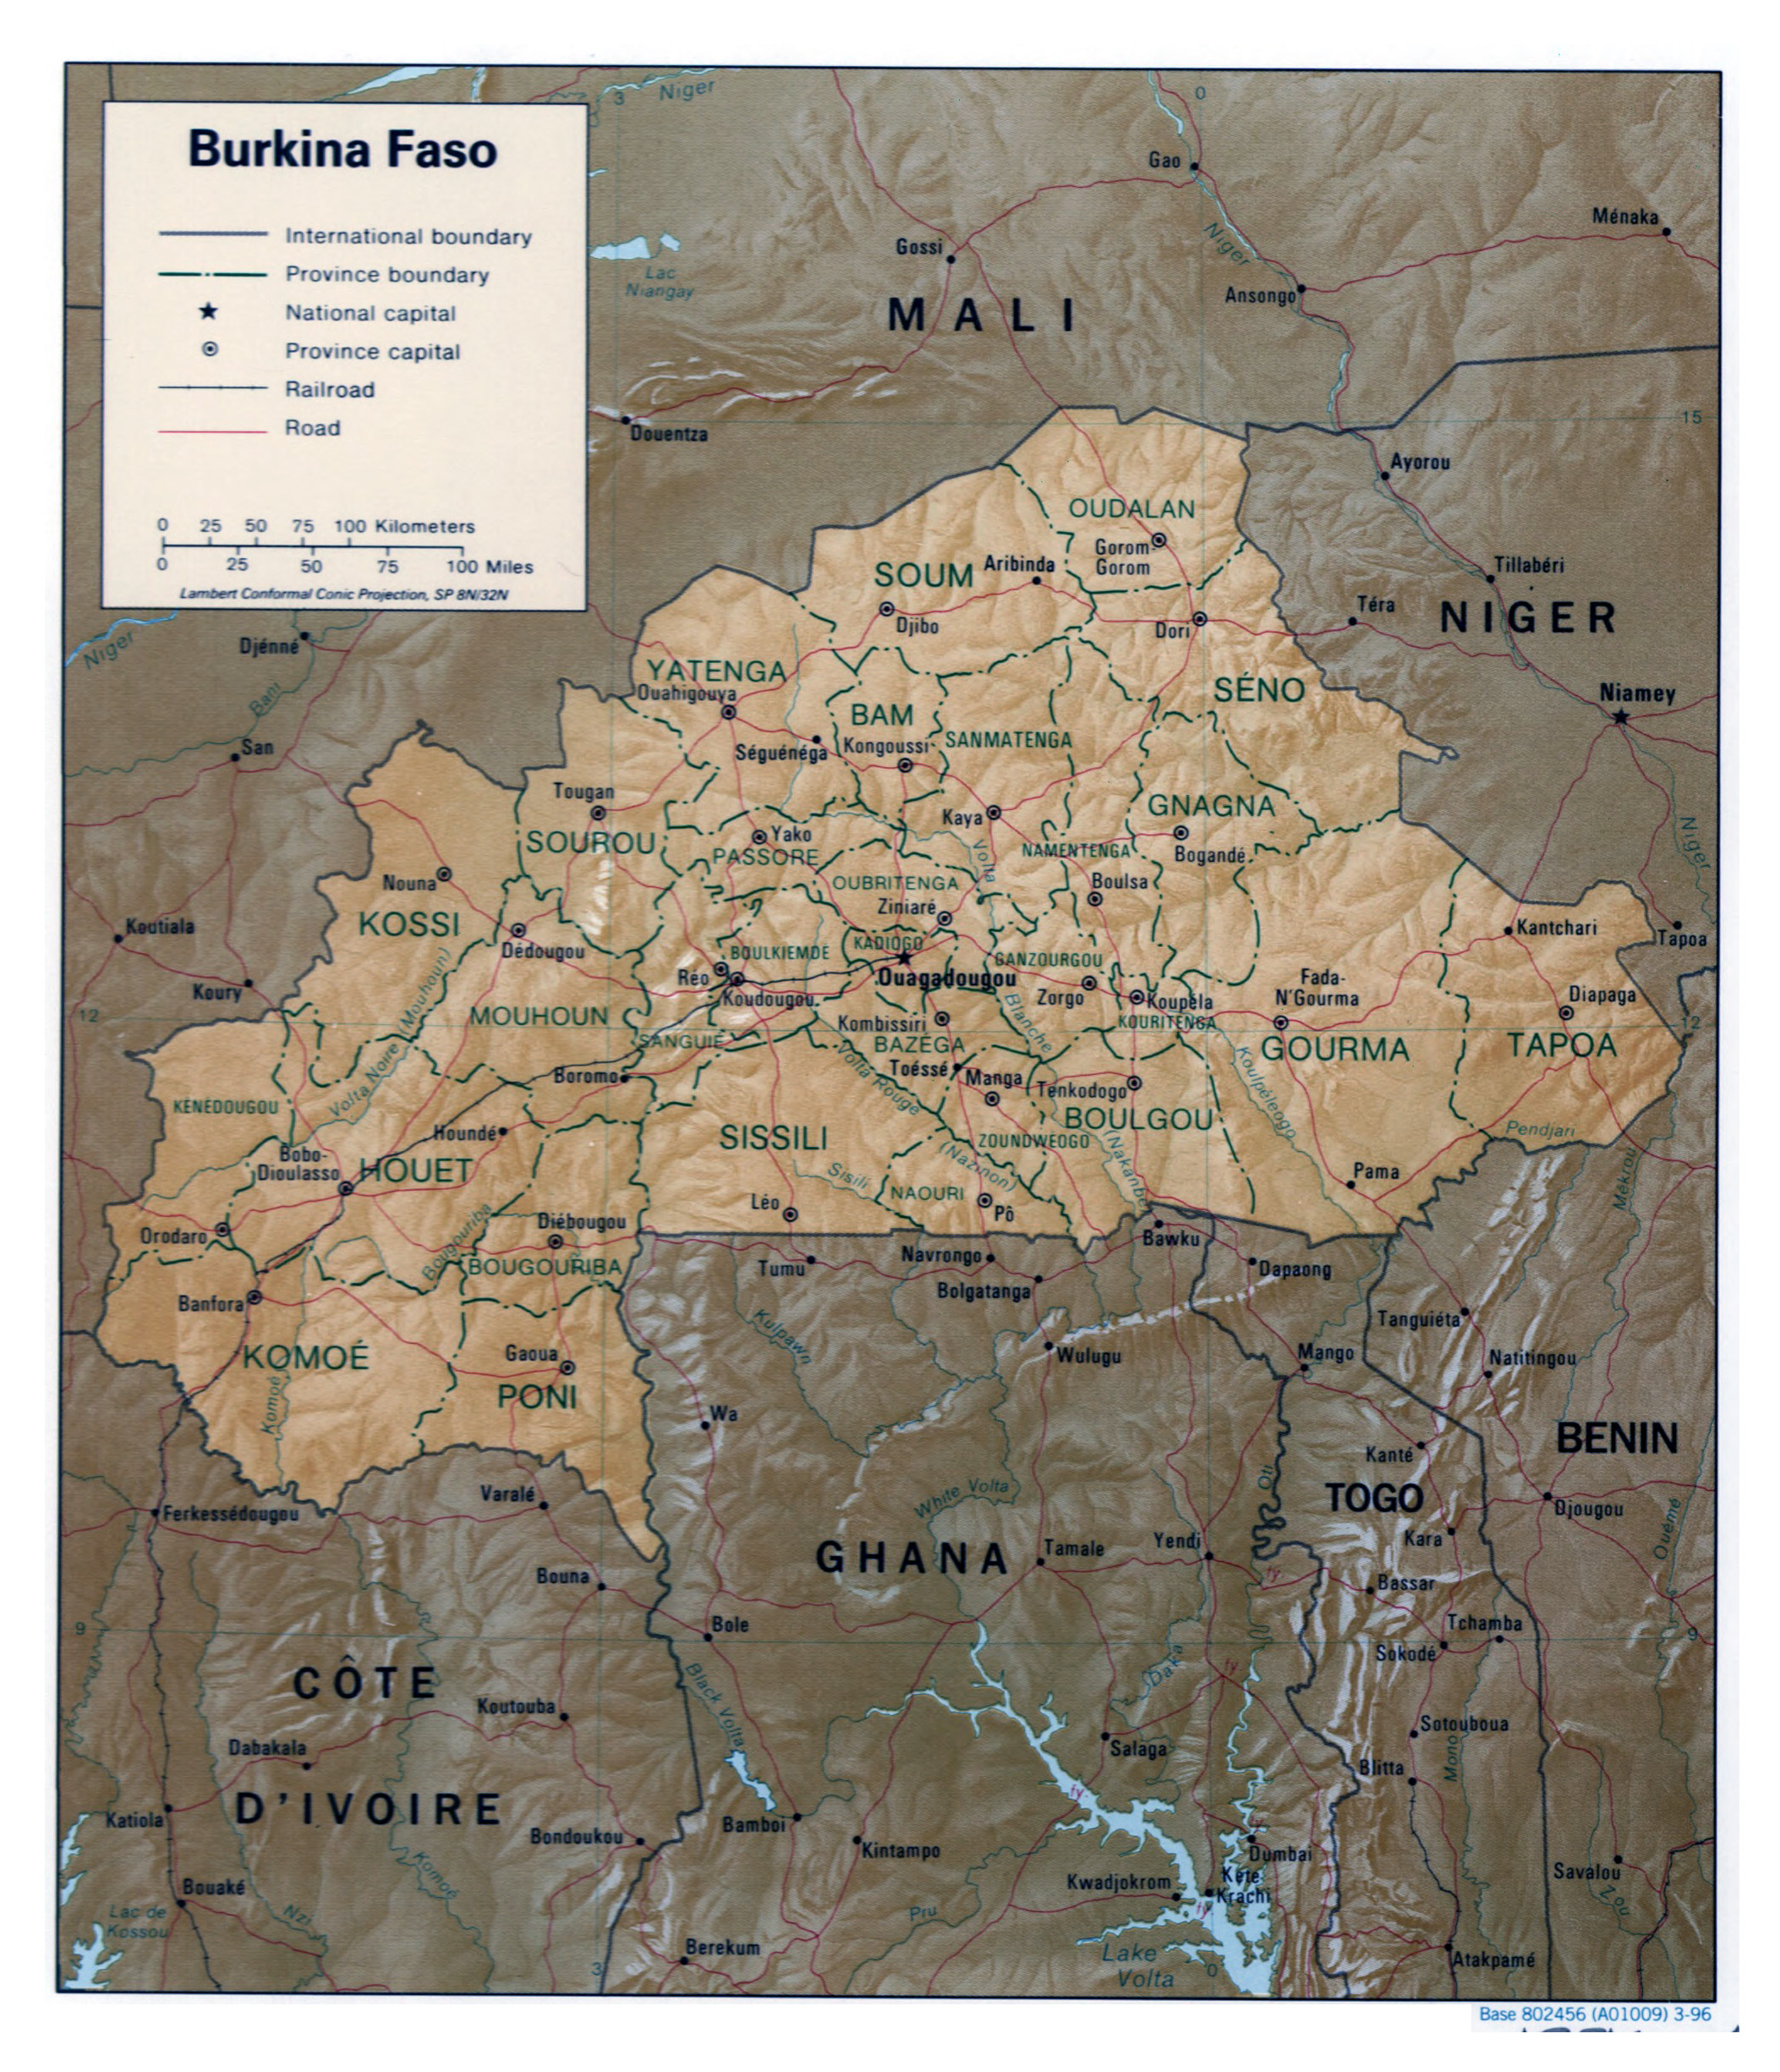 Large Detailed Political And Administrative Map Of Burkina Faso With